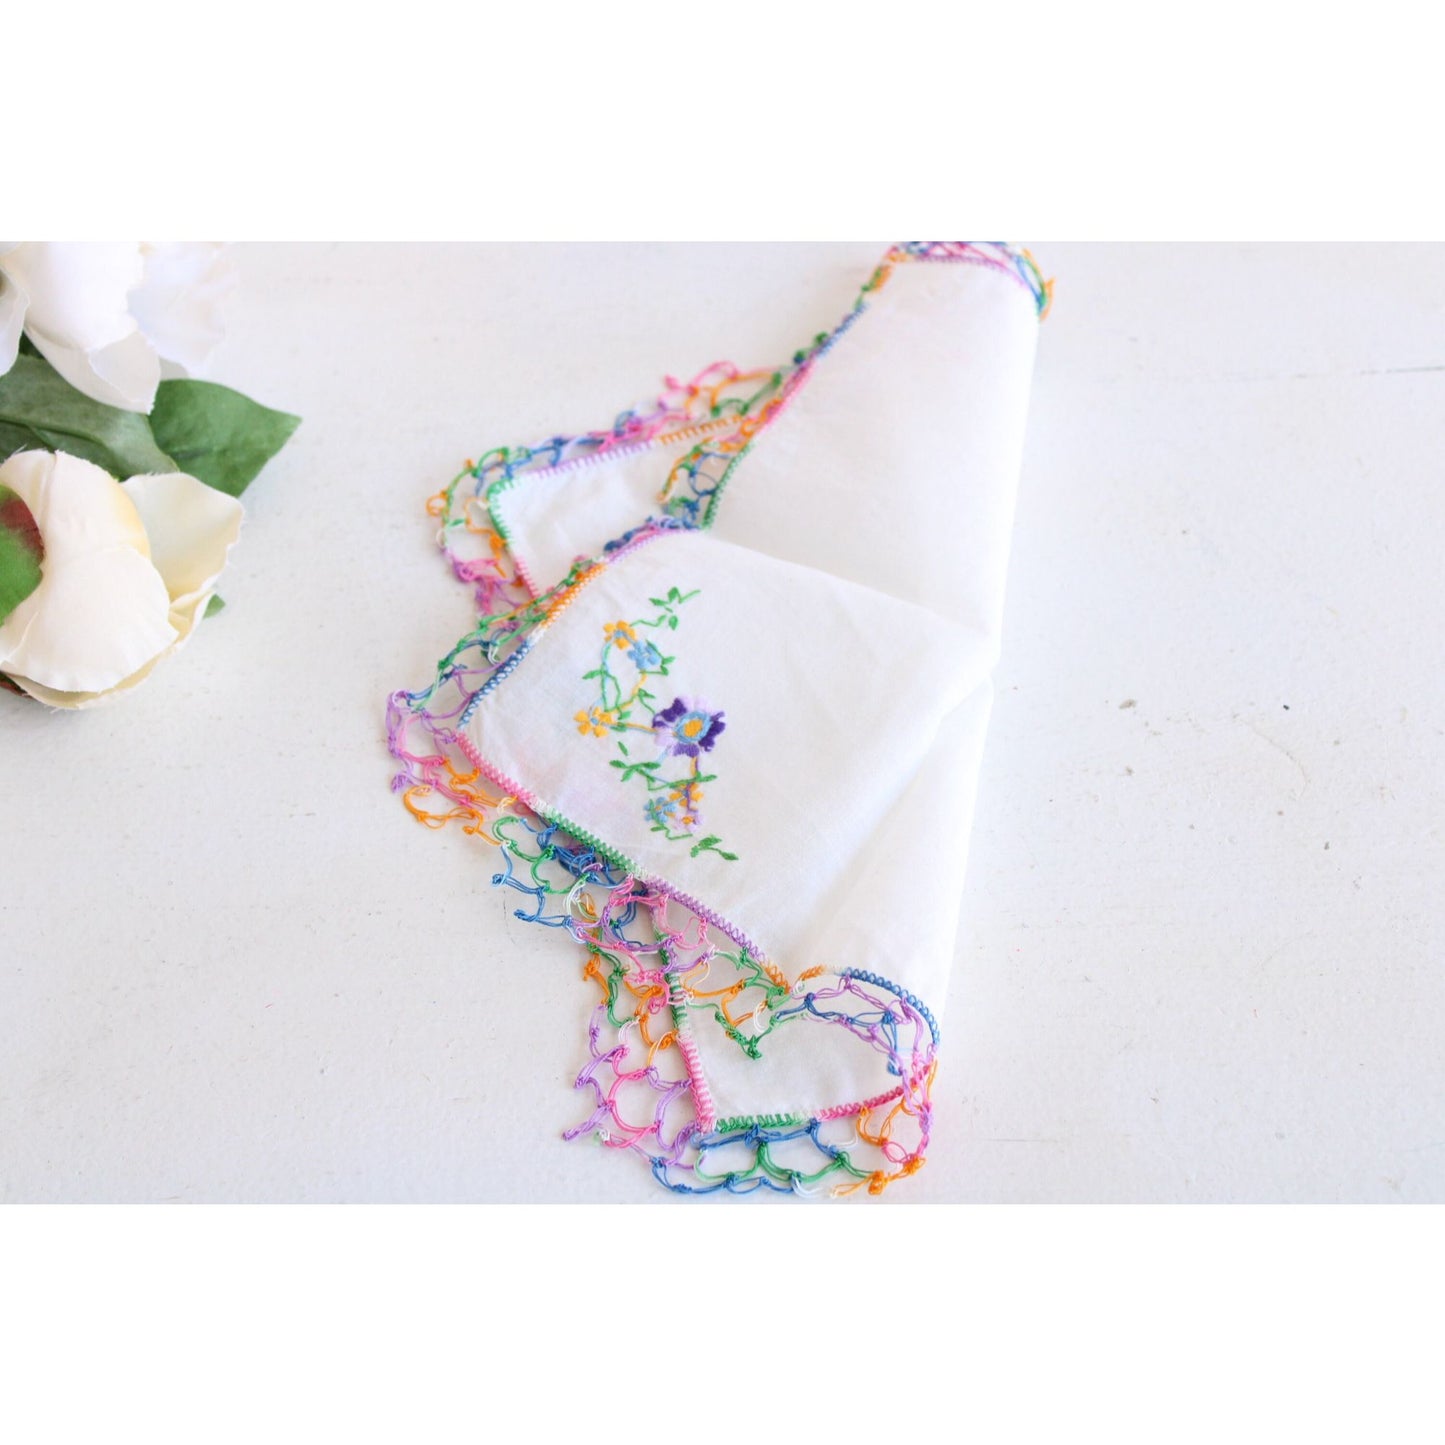 Vintage 1960s White Linen With Rainbow Crochet Trim and Embroidered Flowers Hanky